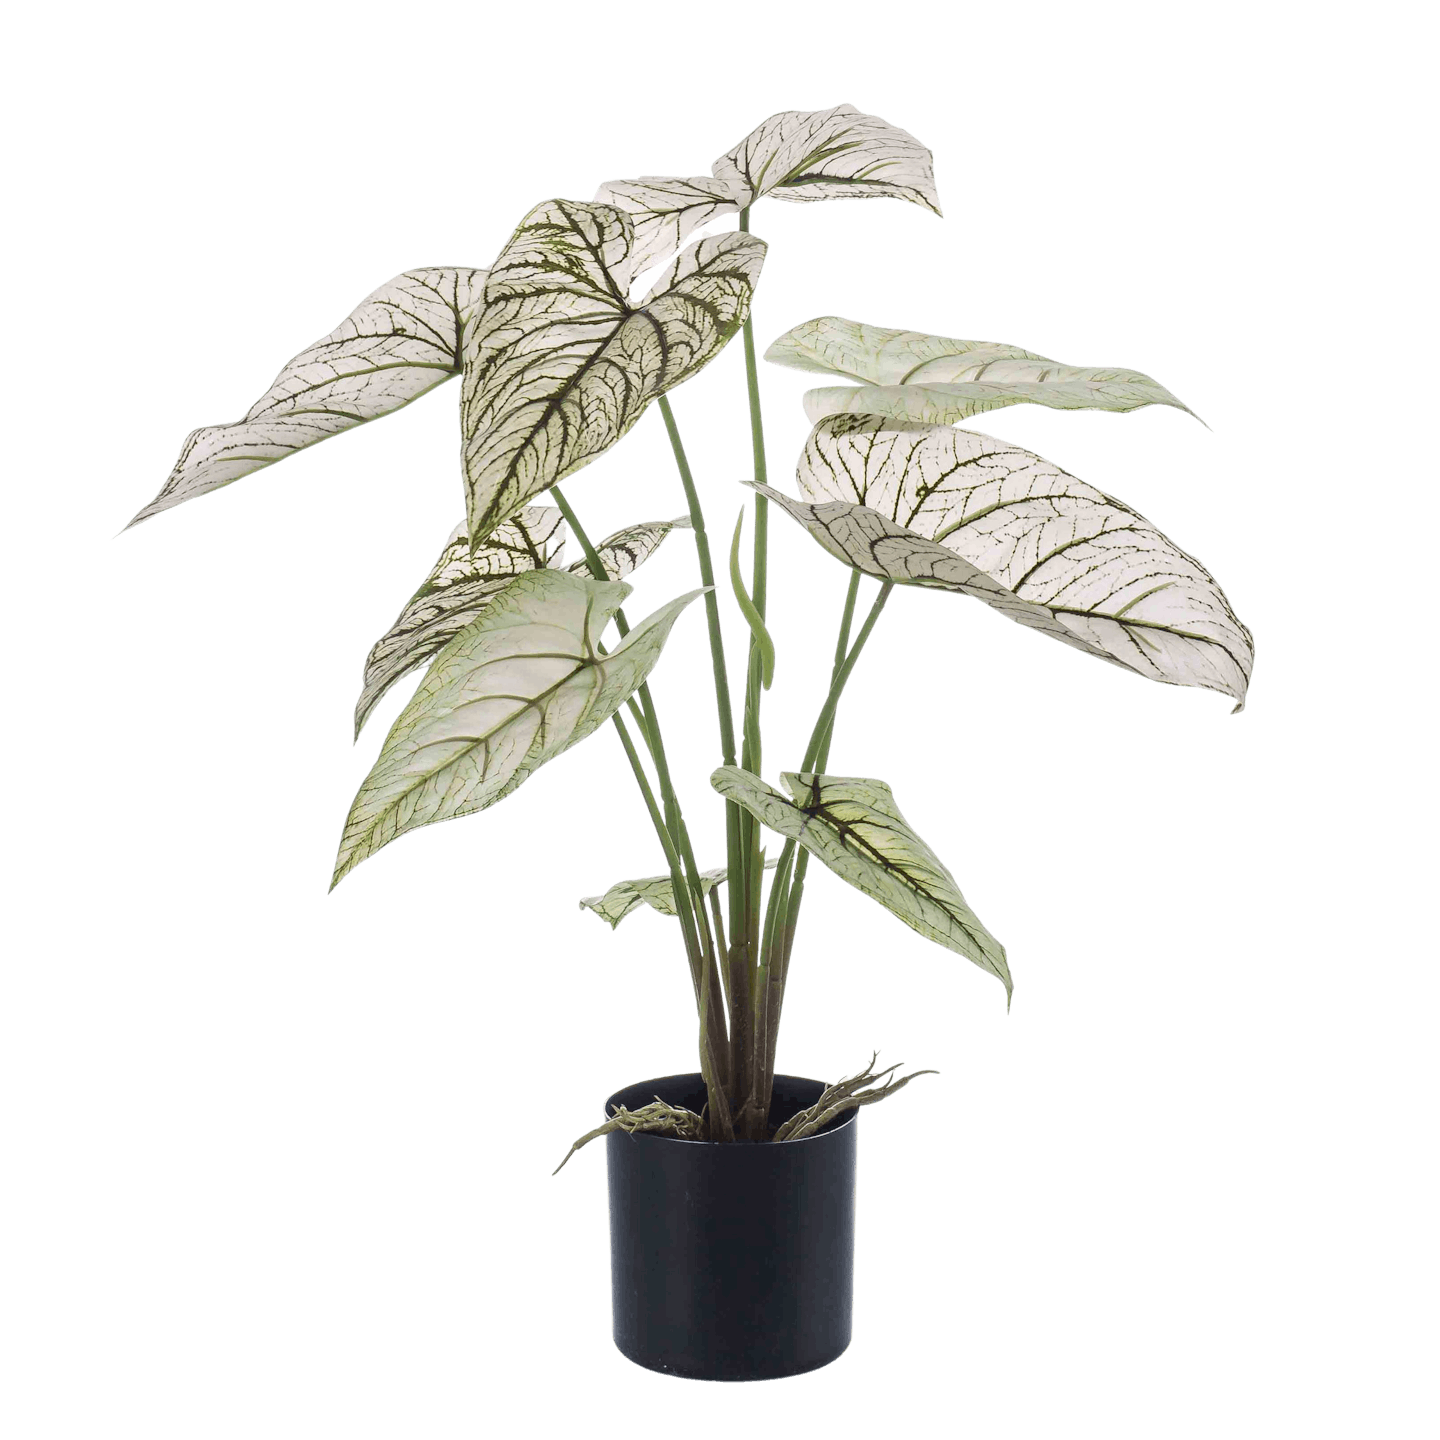 Artificial white green patterened caladium plant